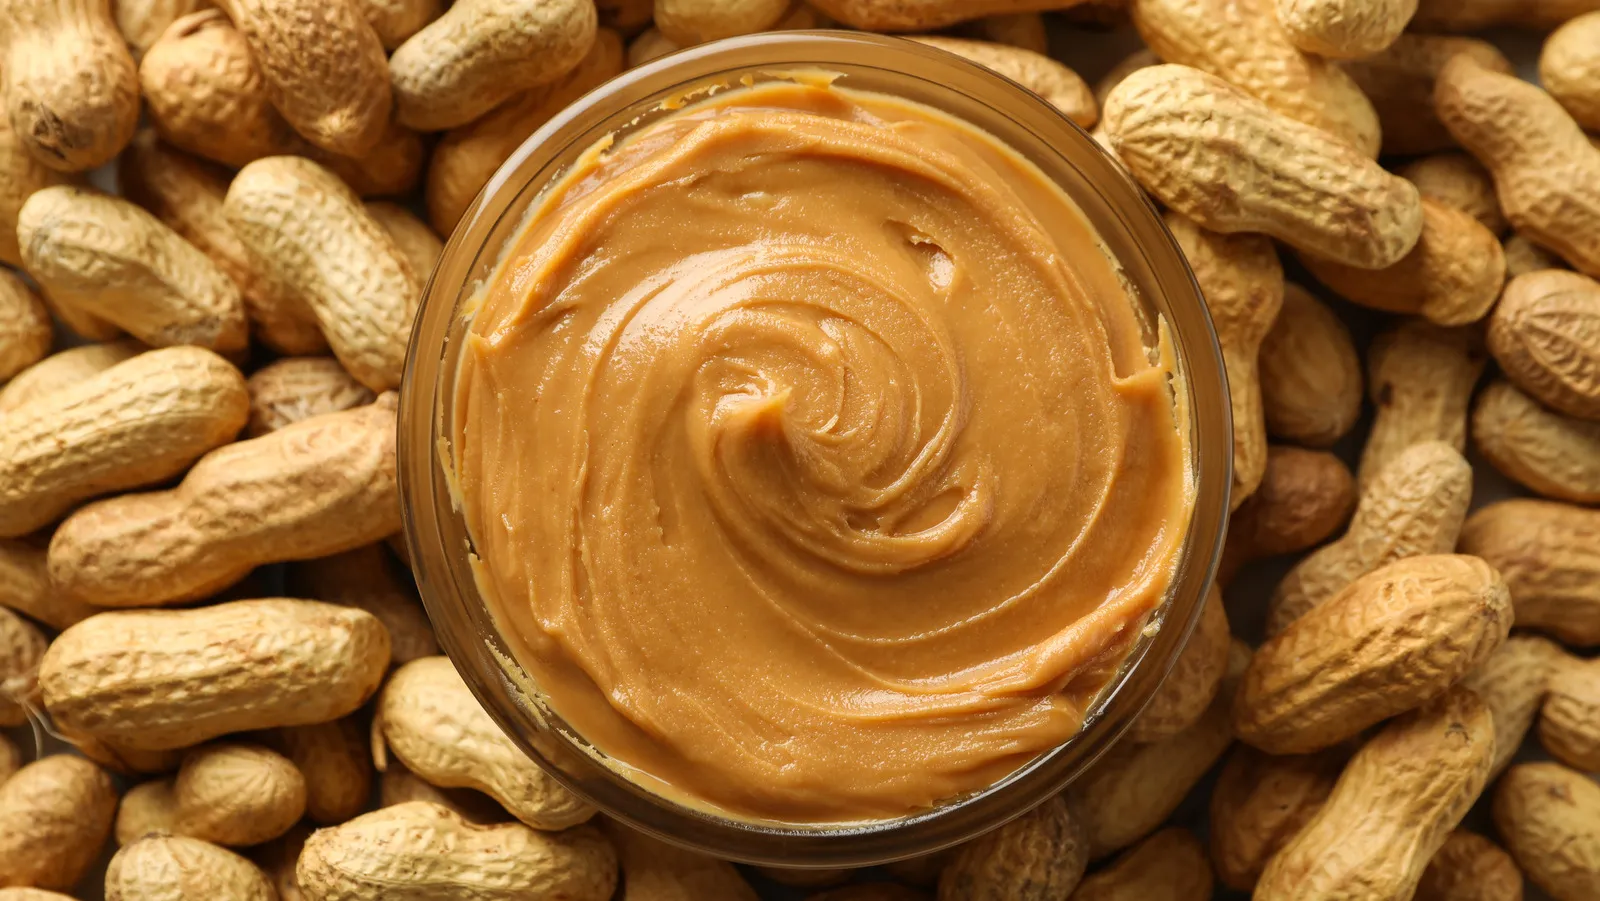 Peanut butter are peanuts, roasted, ground until they turn into a paste